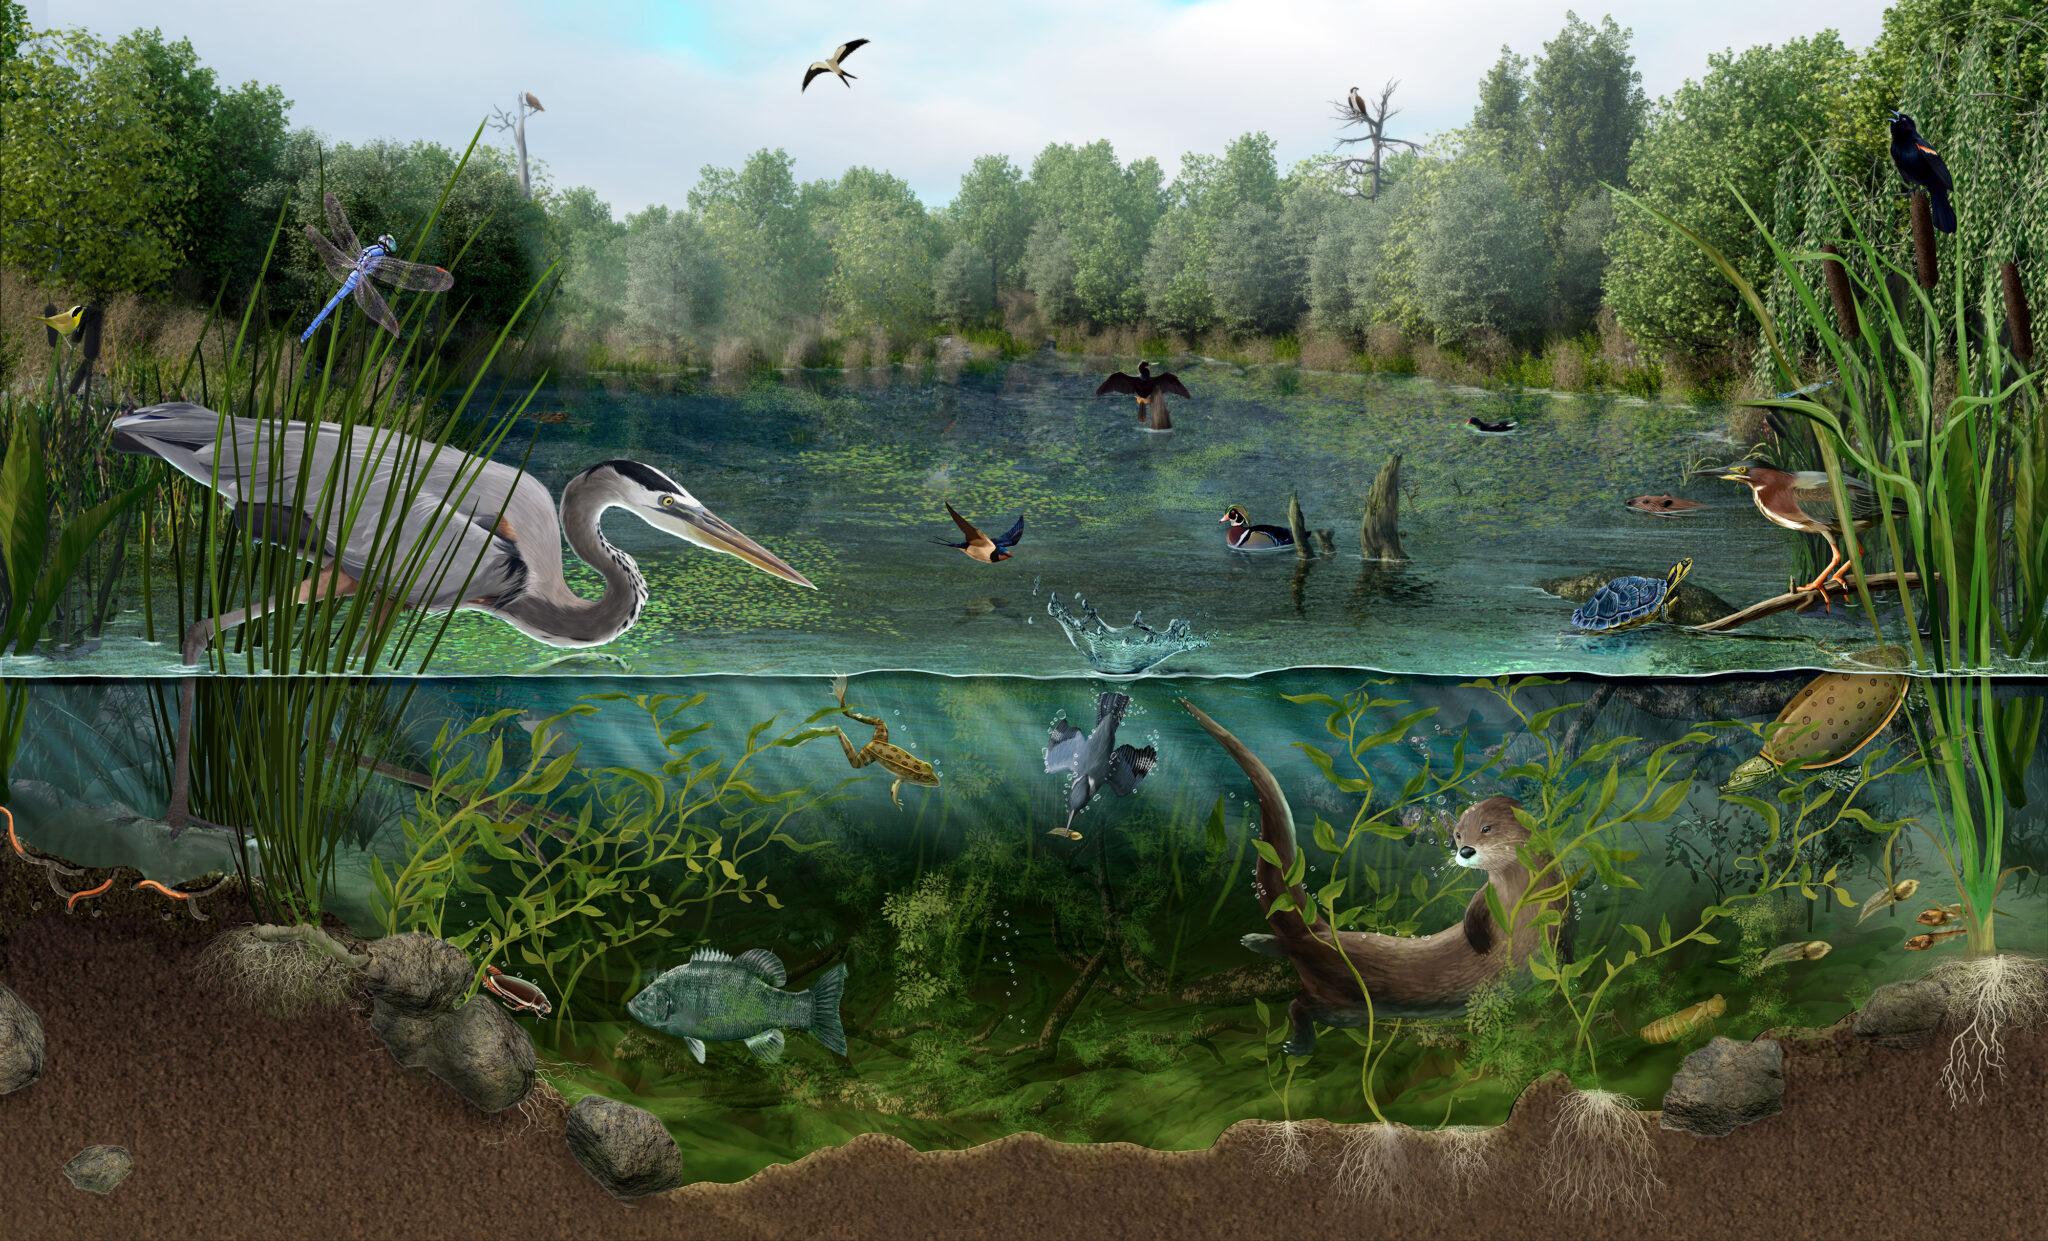 Nature preserve mural art showing a pond filled with birds, fish, amphibians, mammals and reptiles.